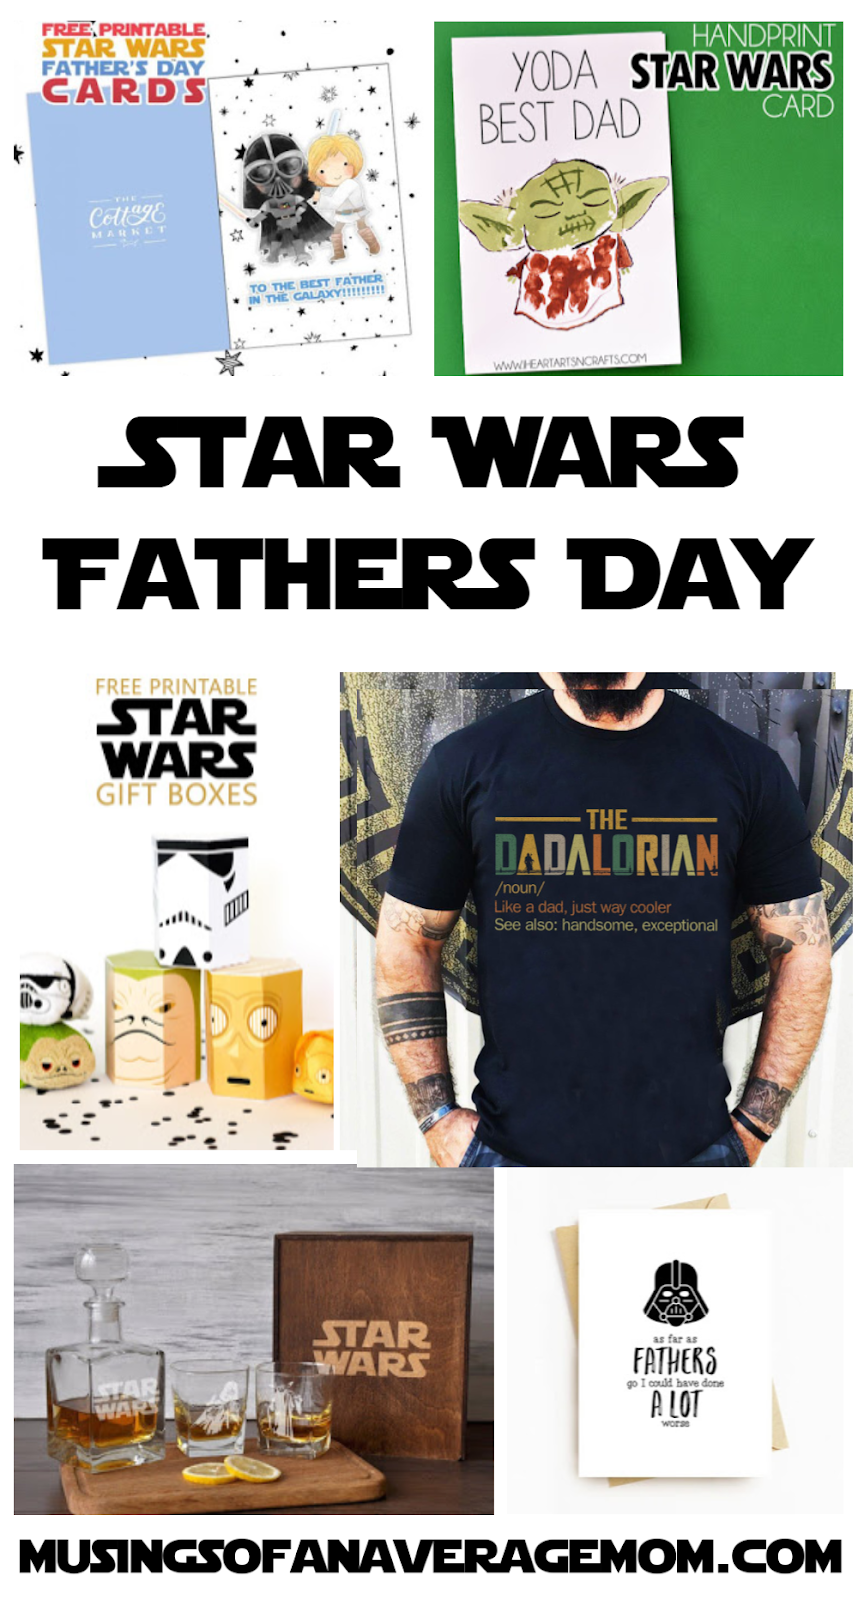 Musings of an Average Mom: Star Wars Kitchen